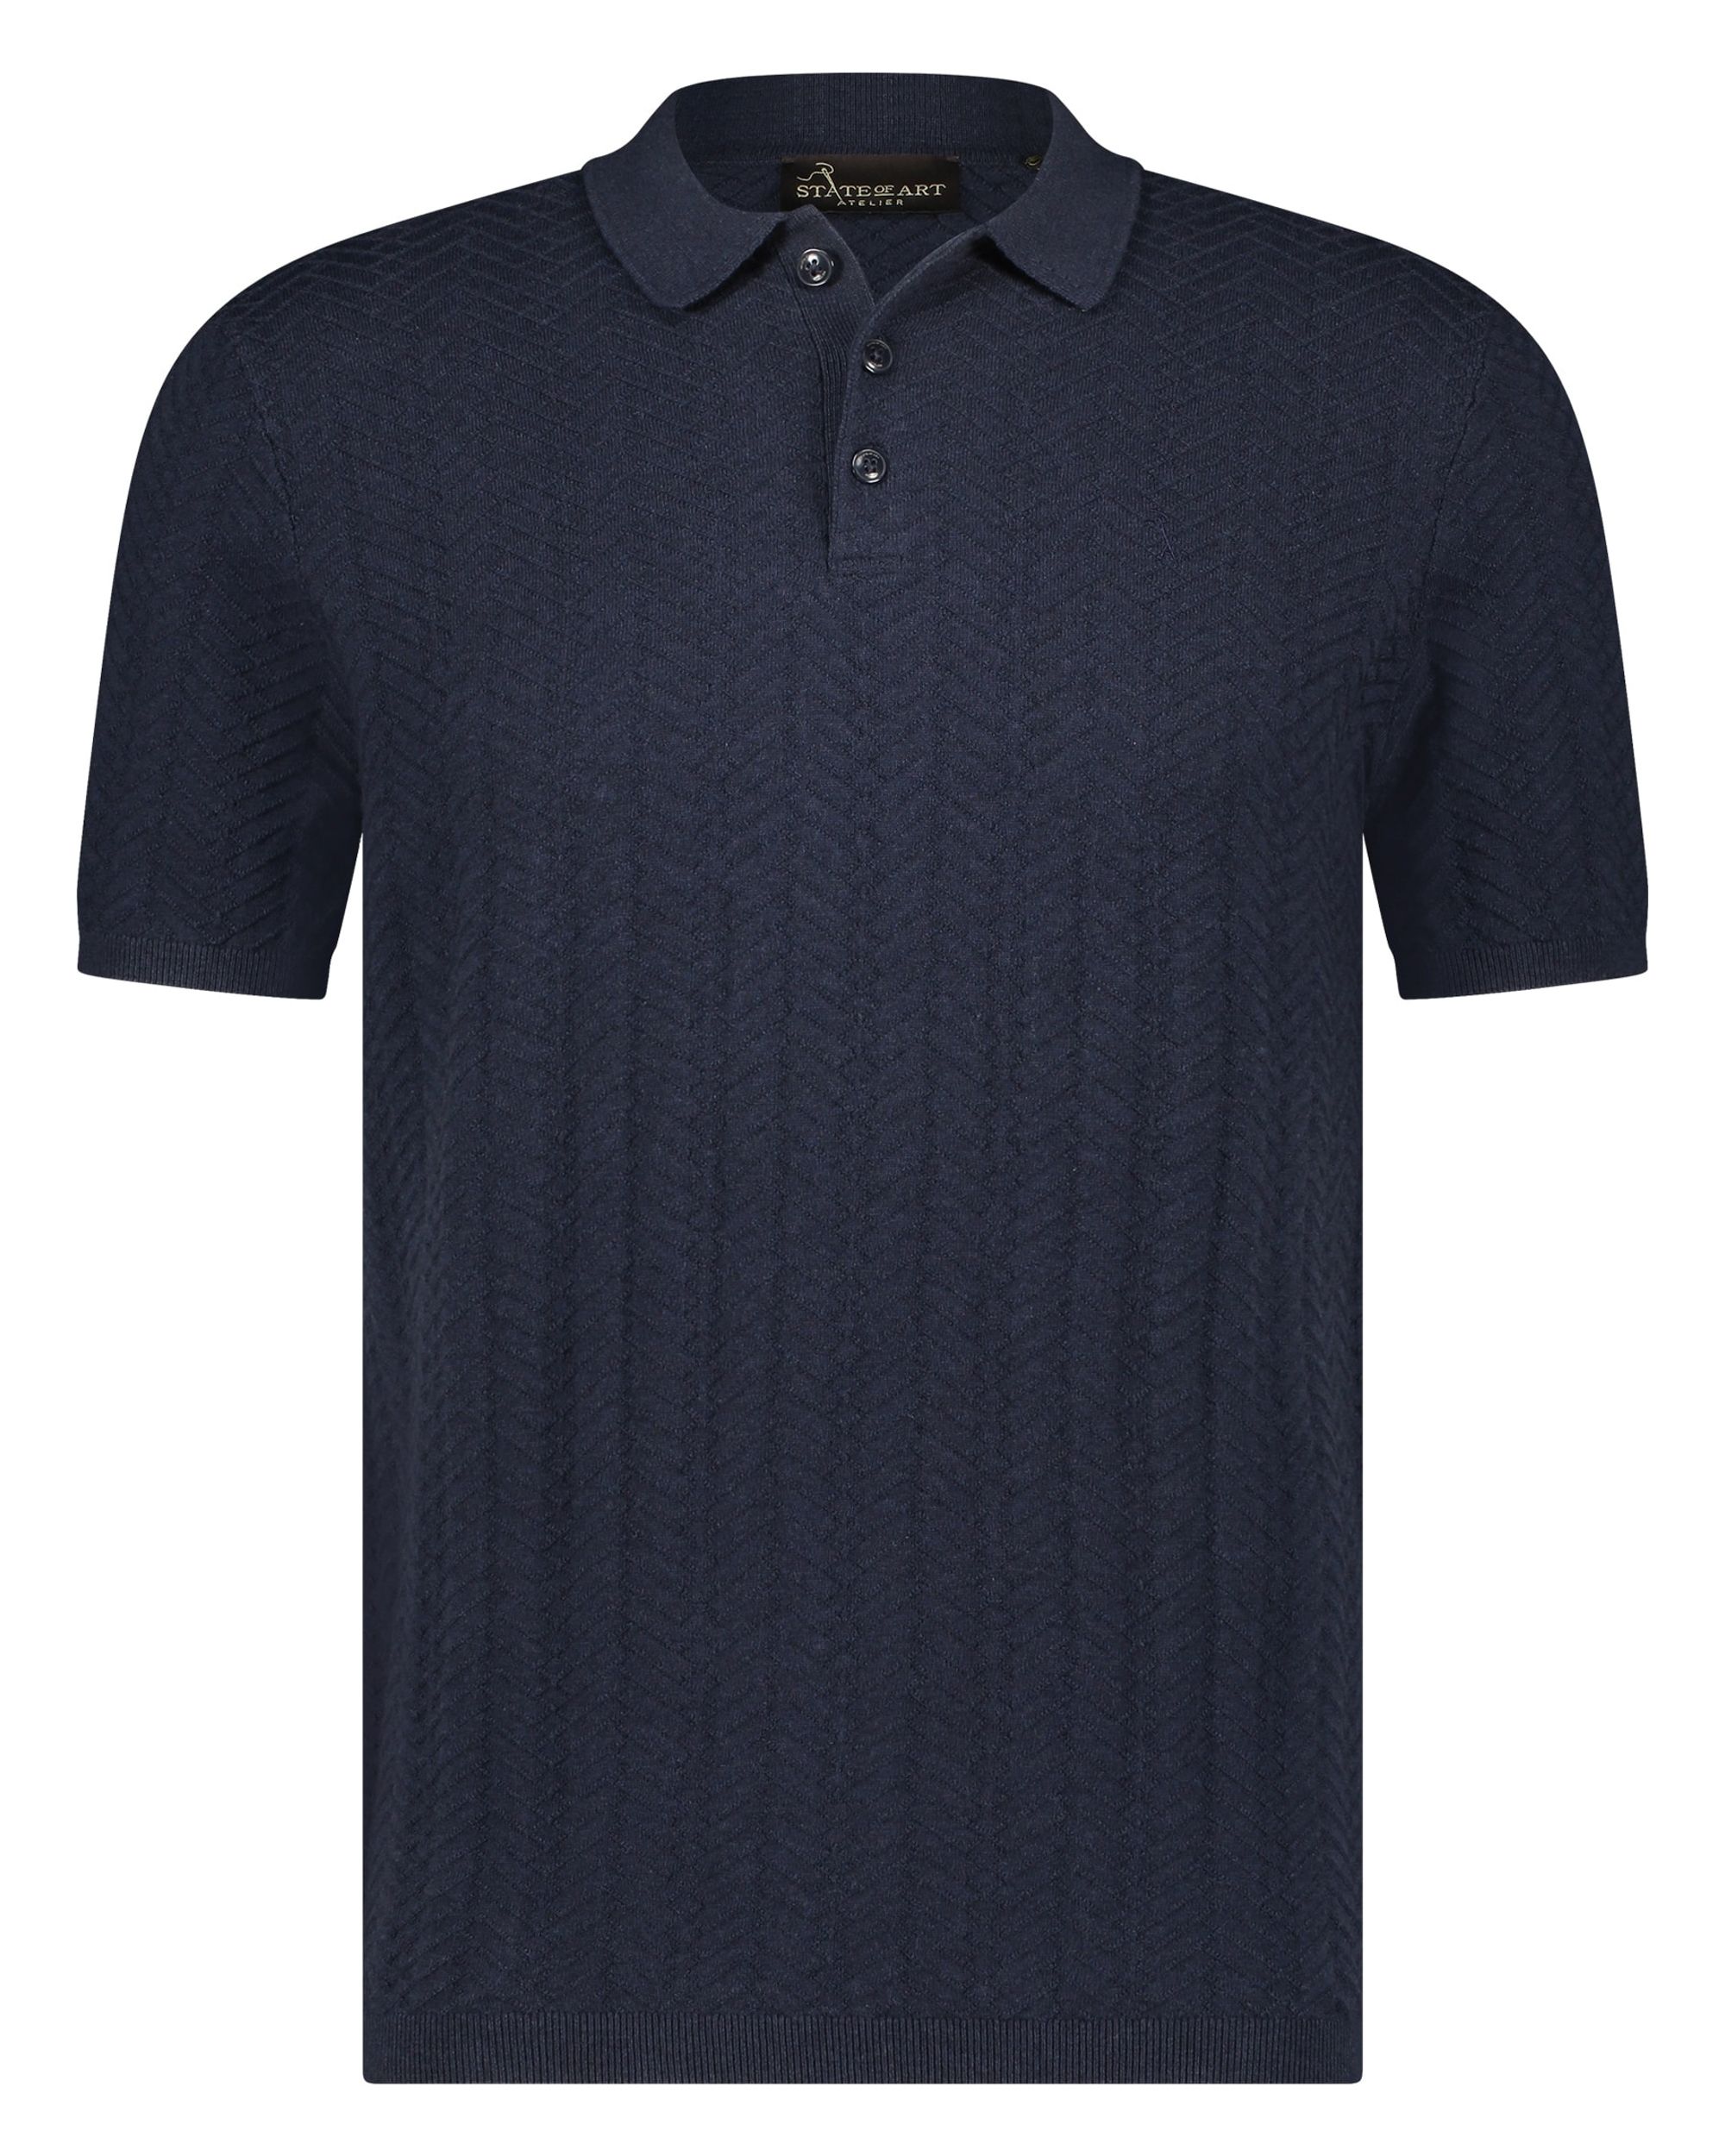 State of Art Polo KM Navy 095076-002-4XL